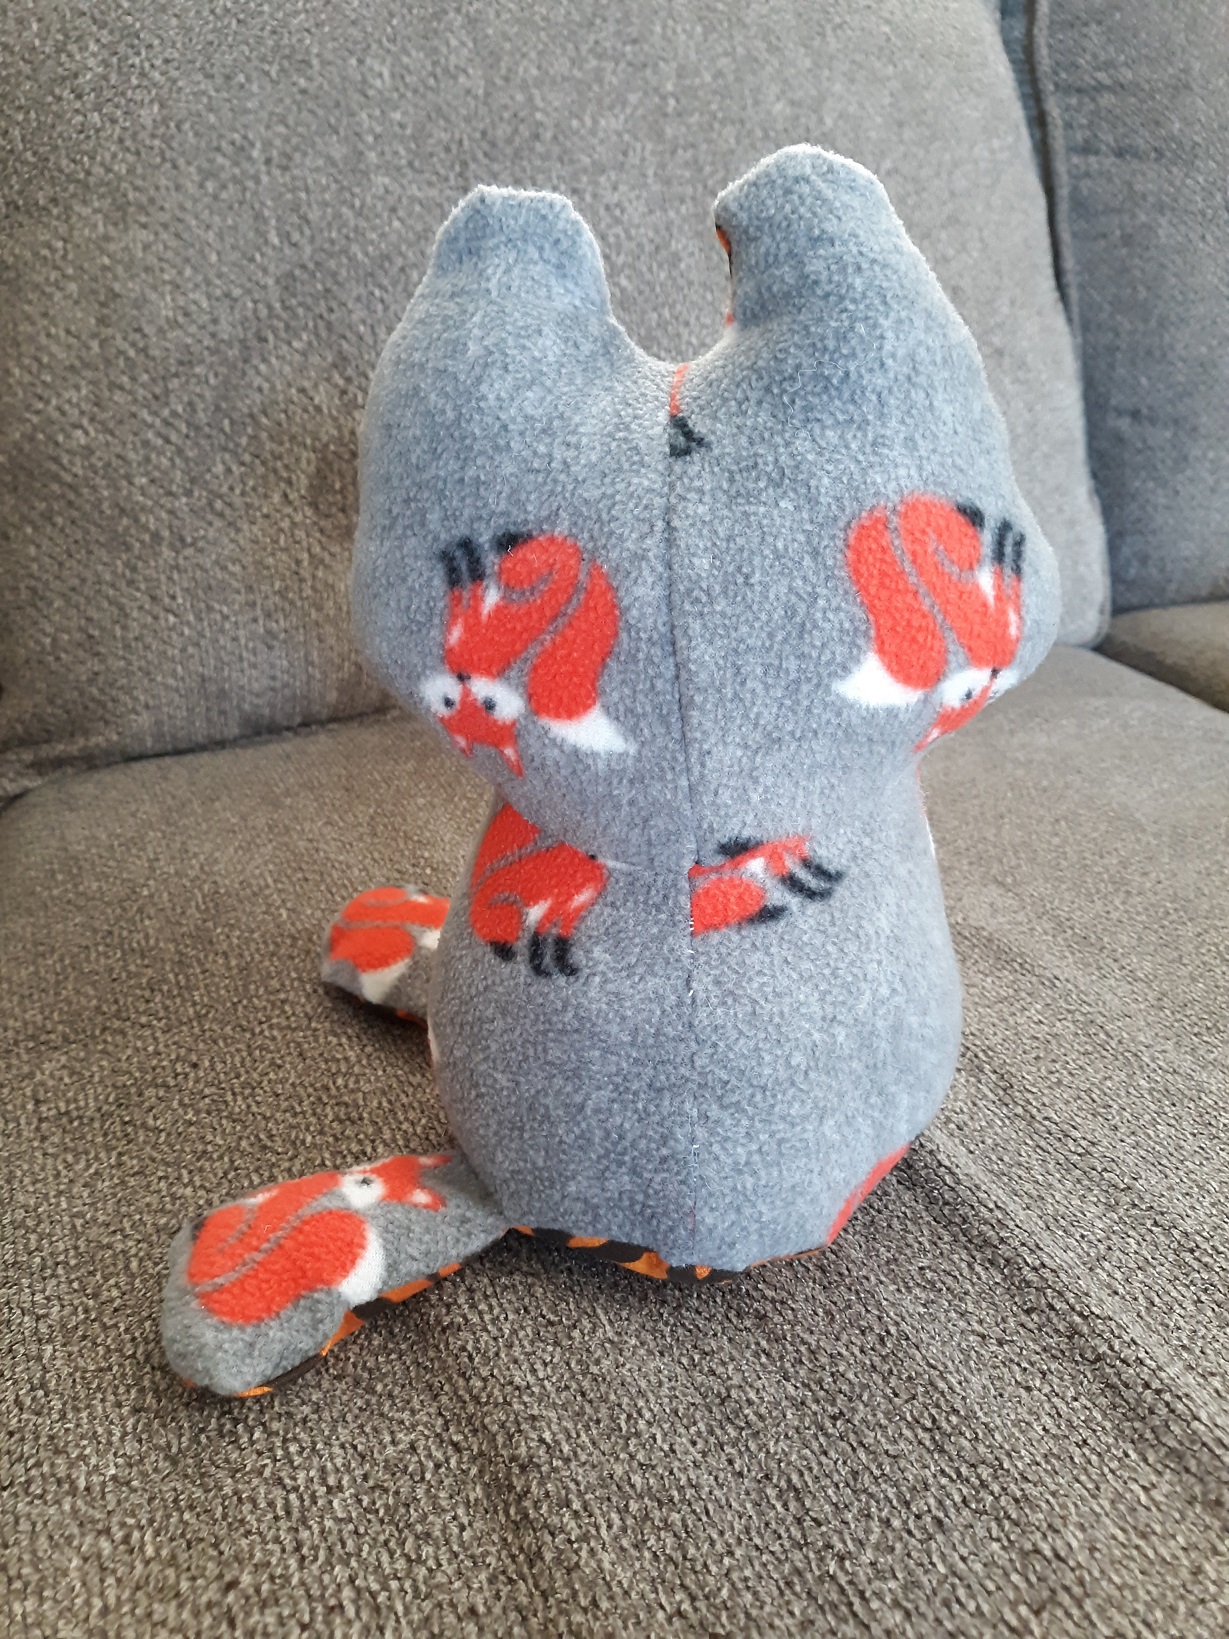 The back of the cat doll. It looks the same as the front, but is lacking a face.